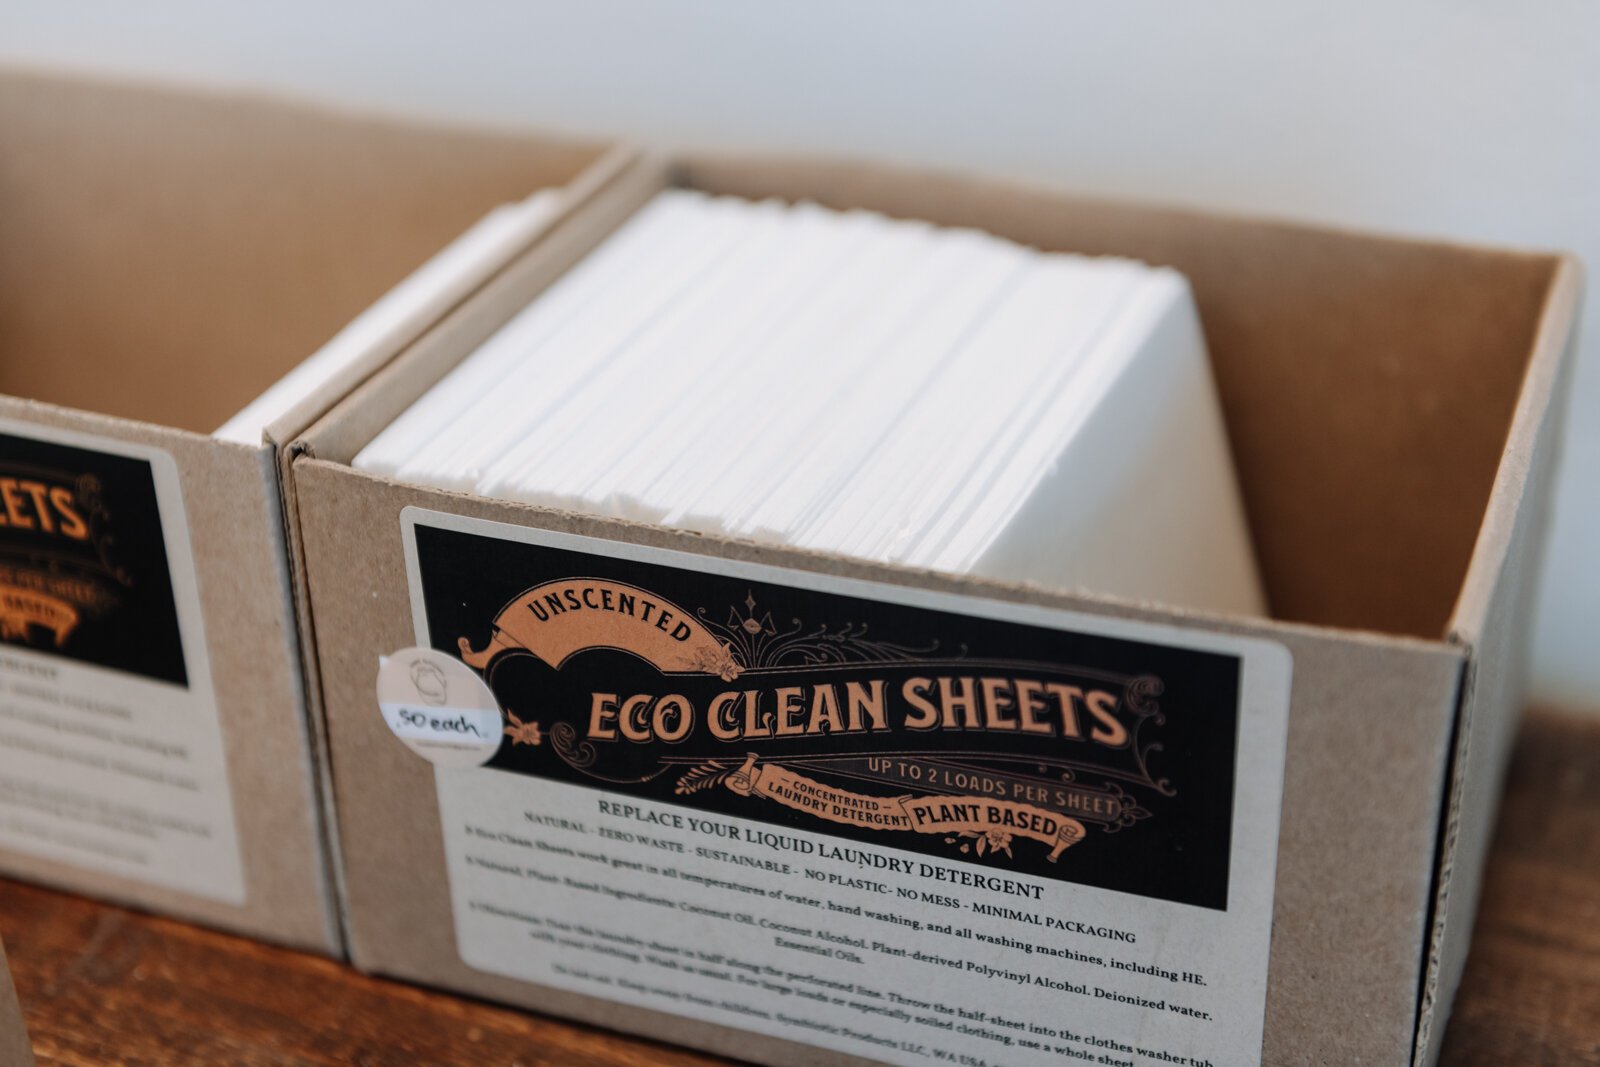 The Eco Sheets are a best seller at Vessel Refillery FW.